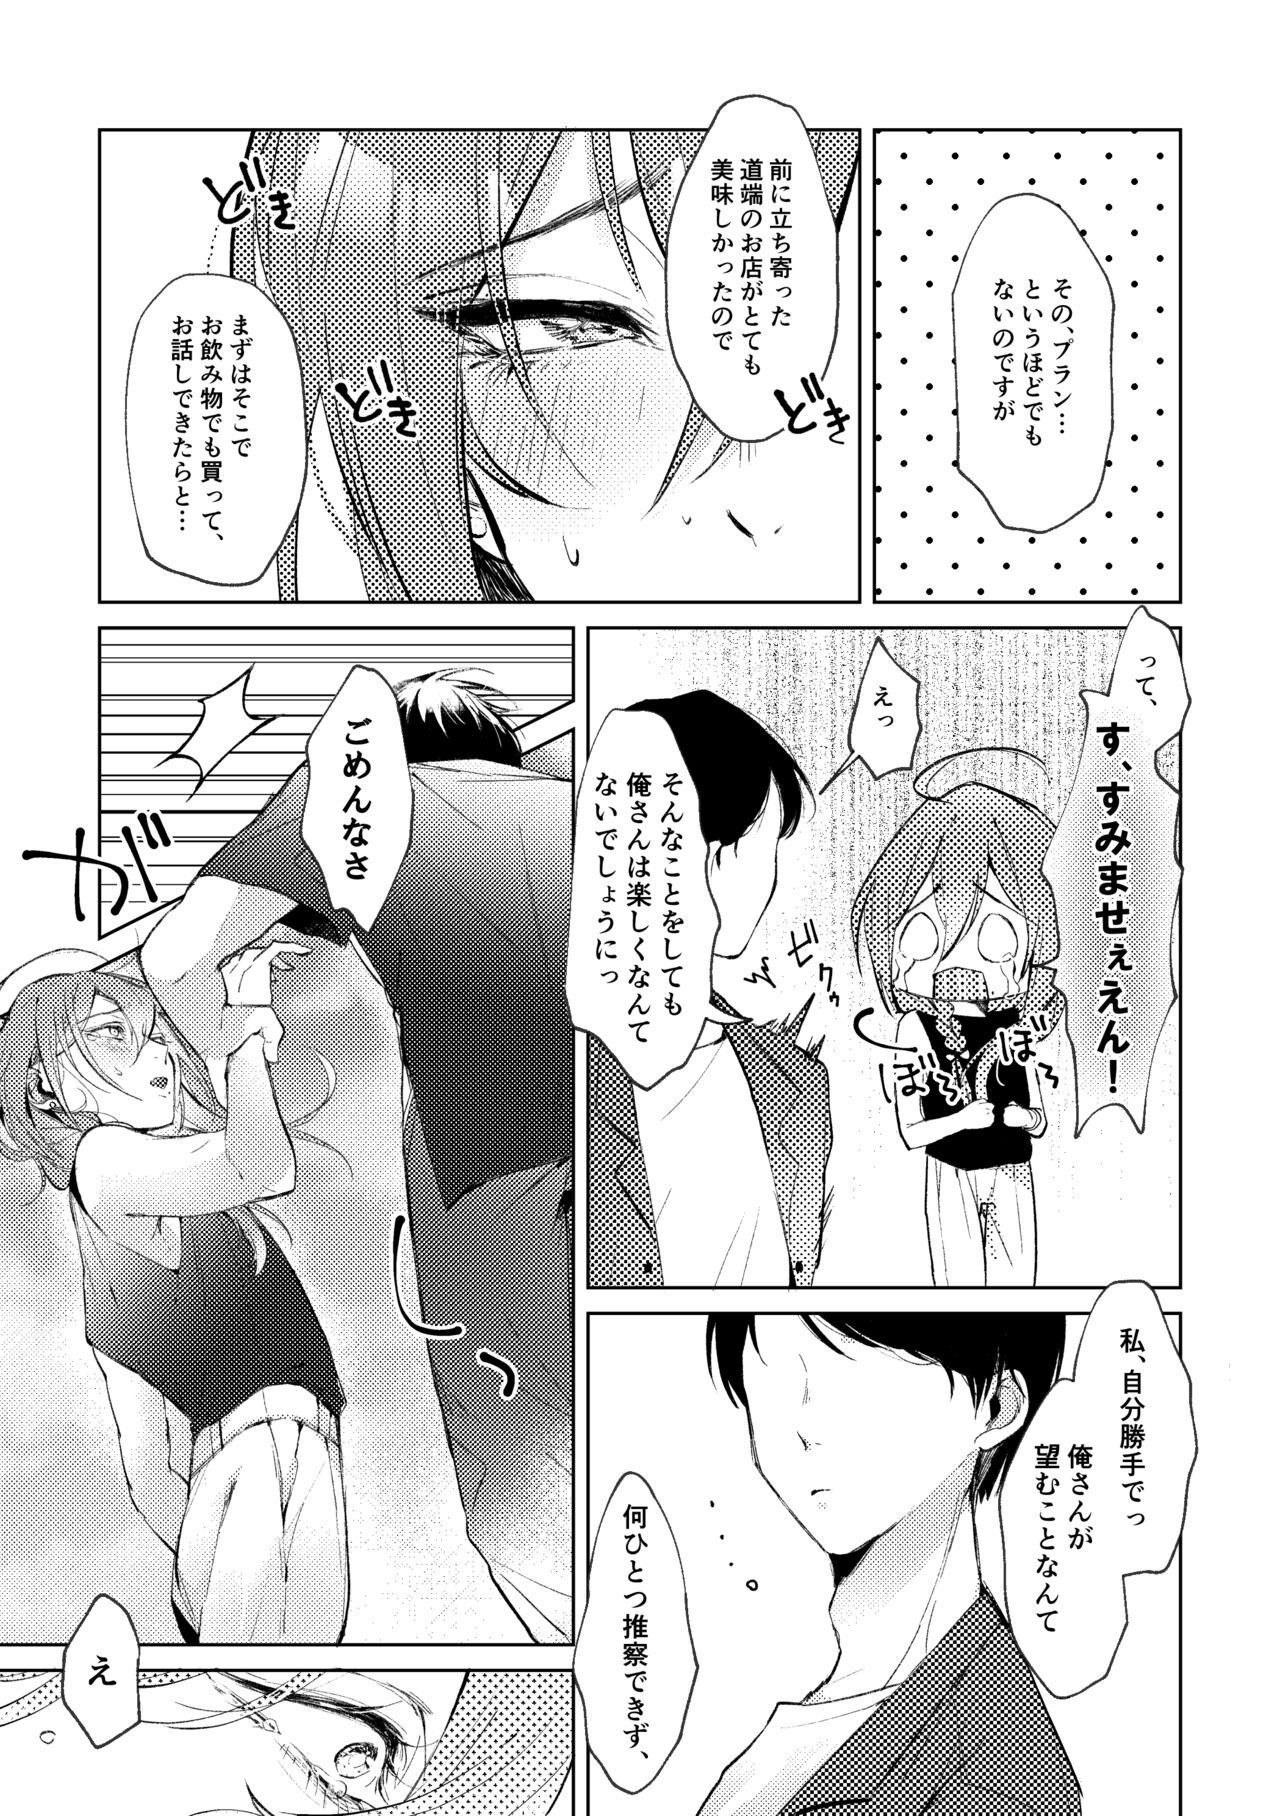 Bubble Butt 俺のカノジョのマヨイくん。 - Ensemble stars Roleplay - Page 8